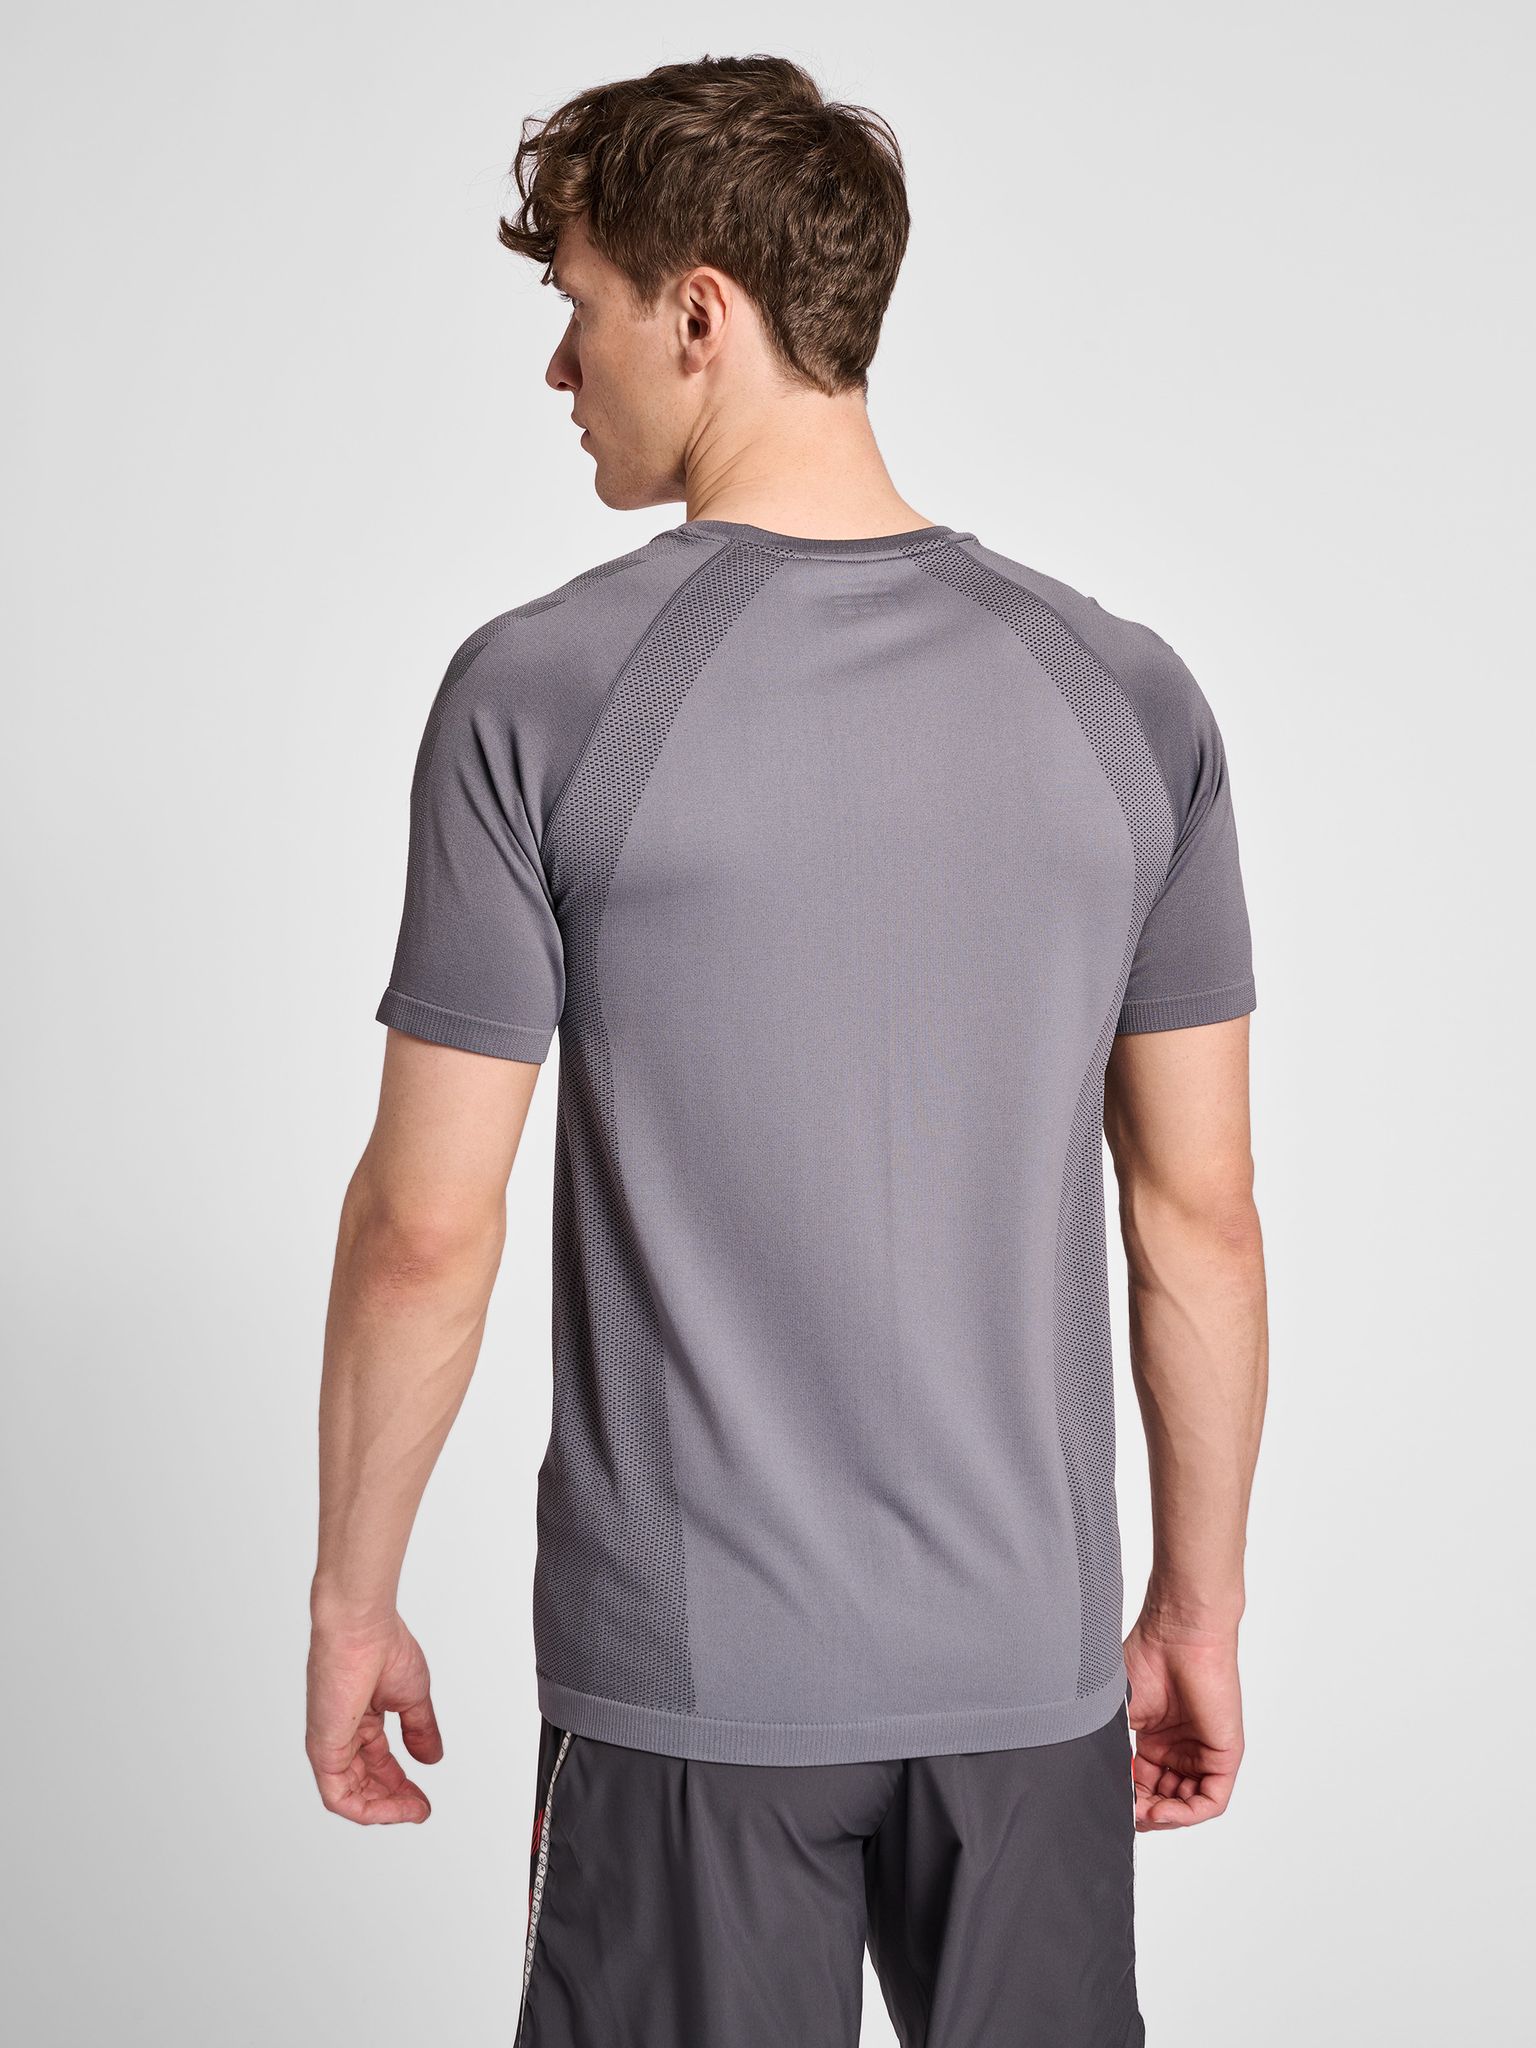 hmlPRO GRID SEAMLESS S/S